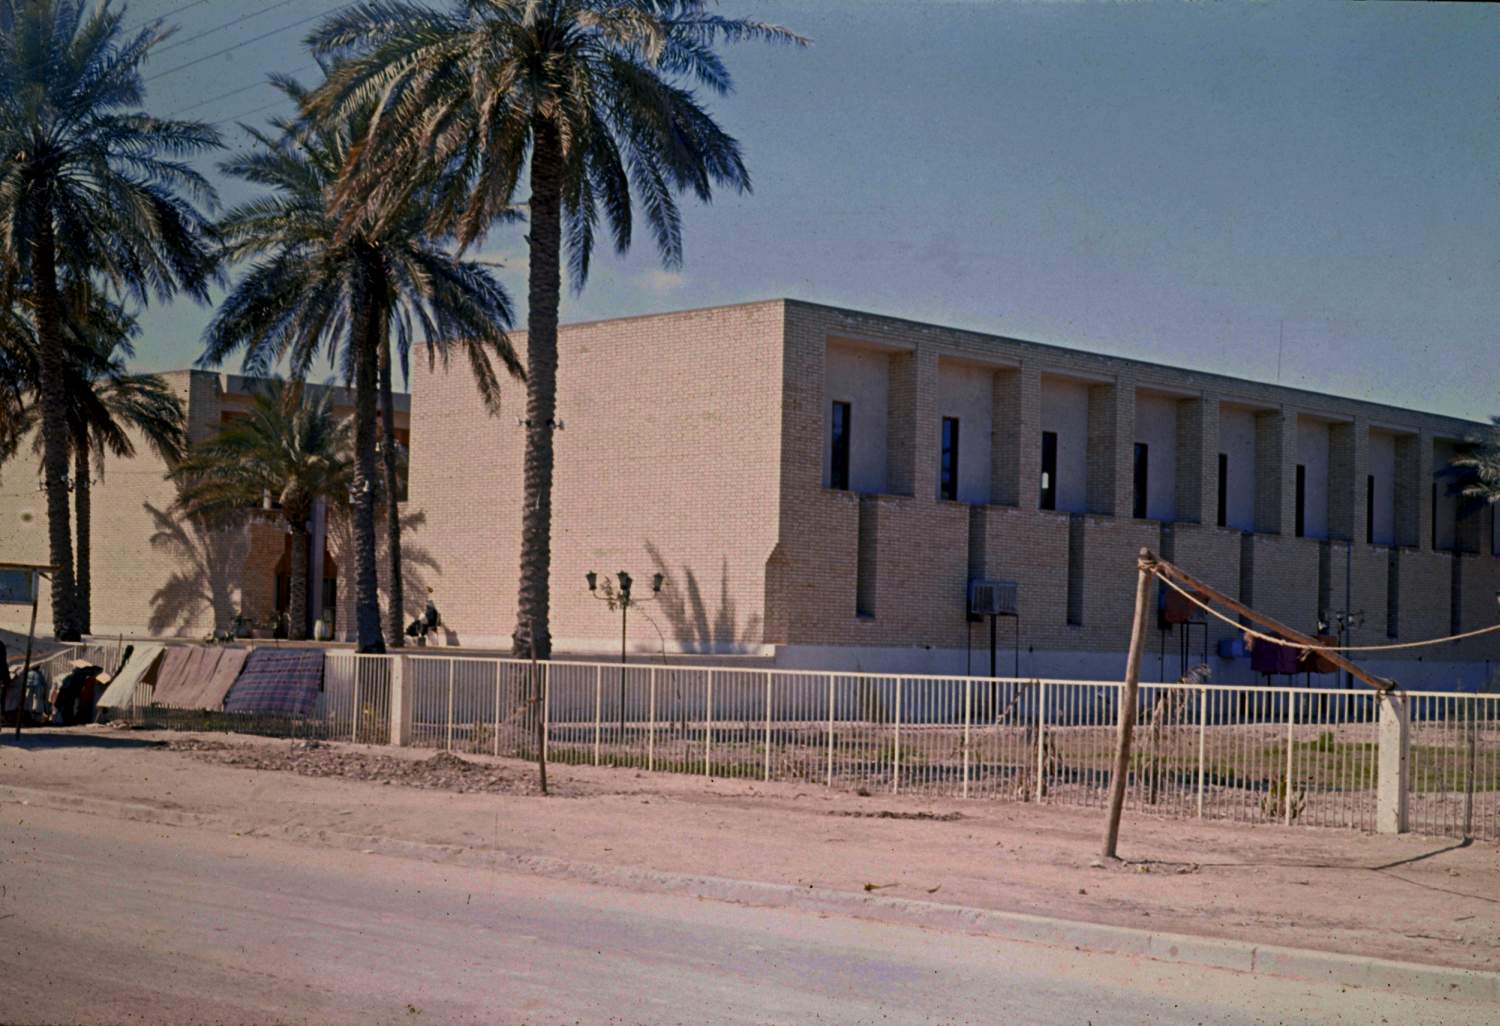 <p>View of east corner showing entrance facade and northeast side of building</p>